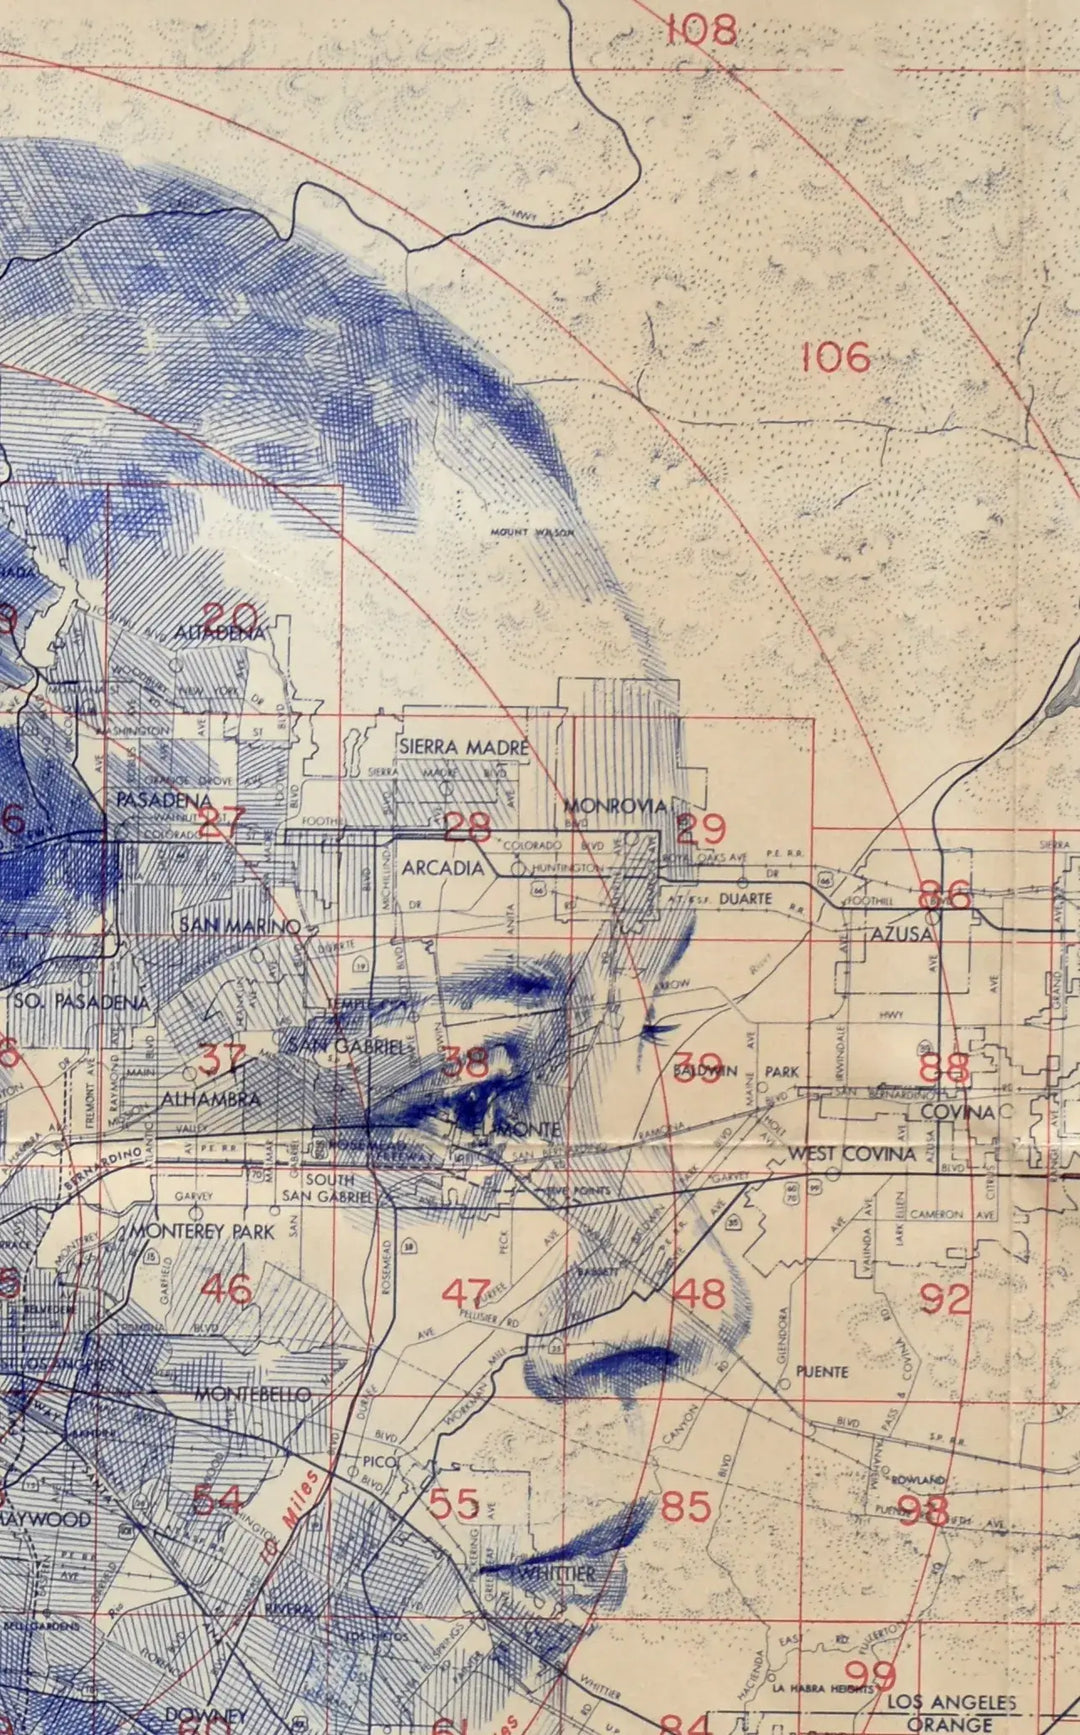 A drawing of a map with blue lines on it, called "Los Angeles I" by Ed Fairburn.